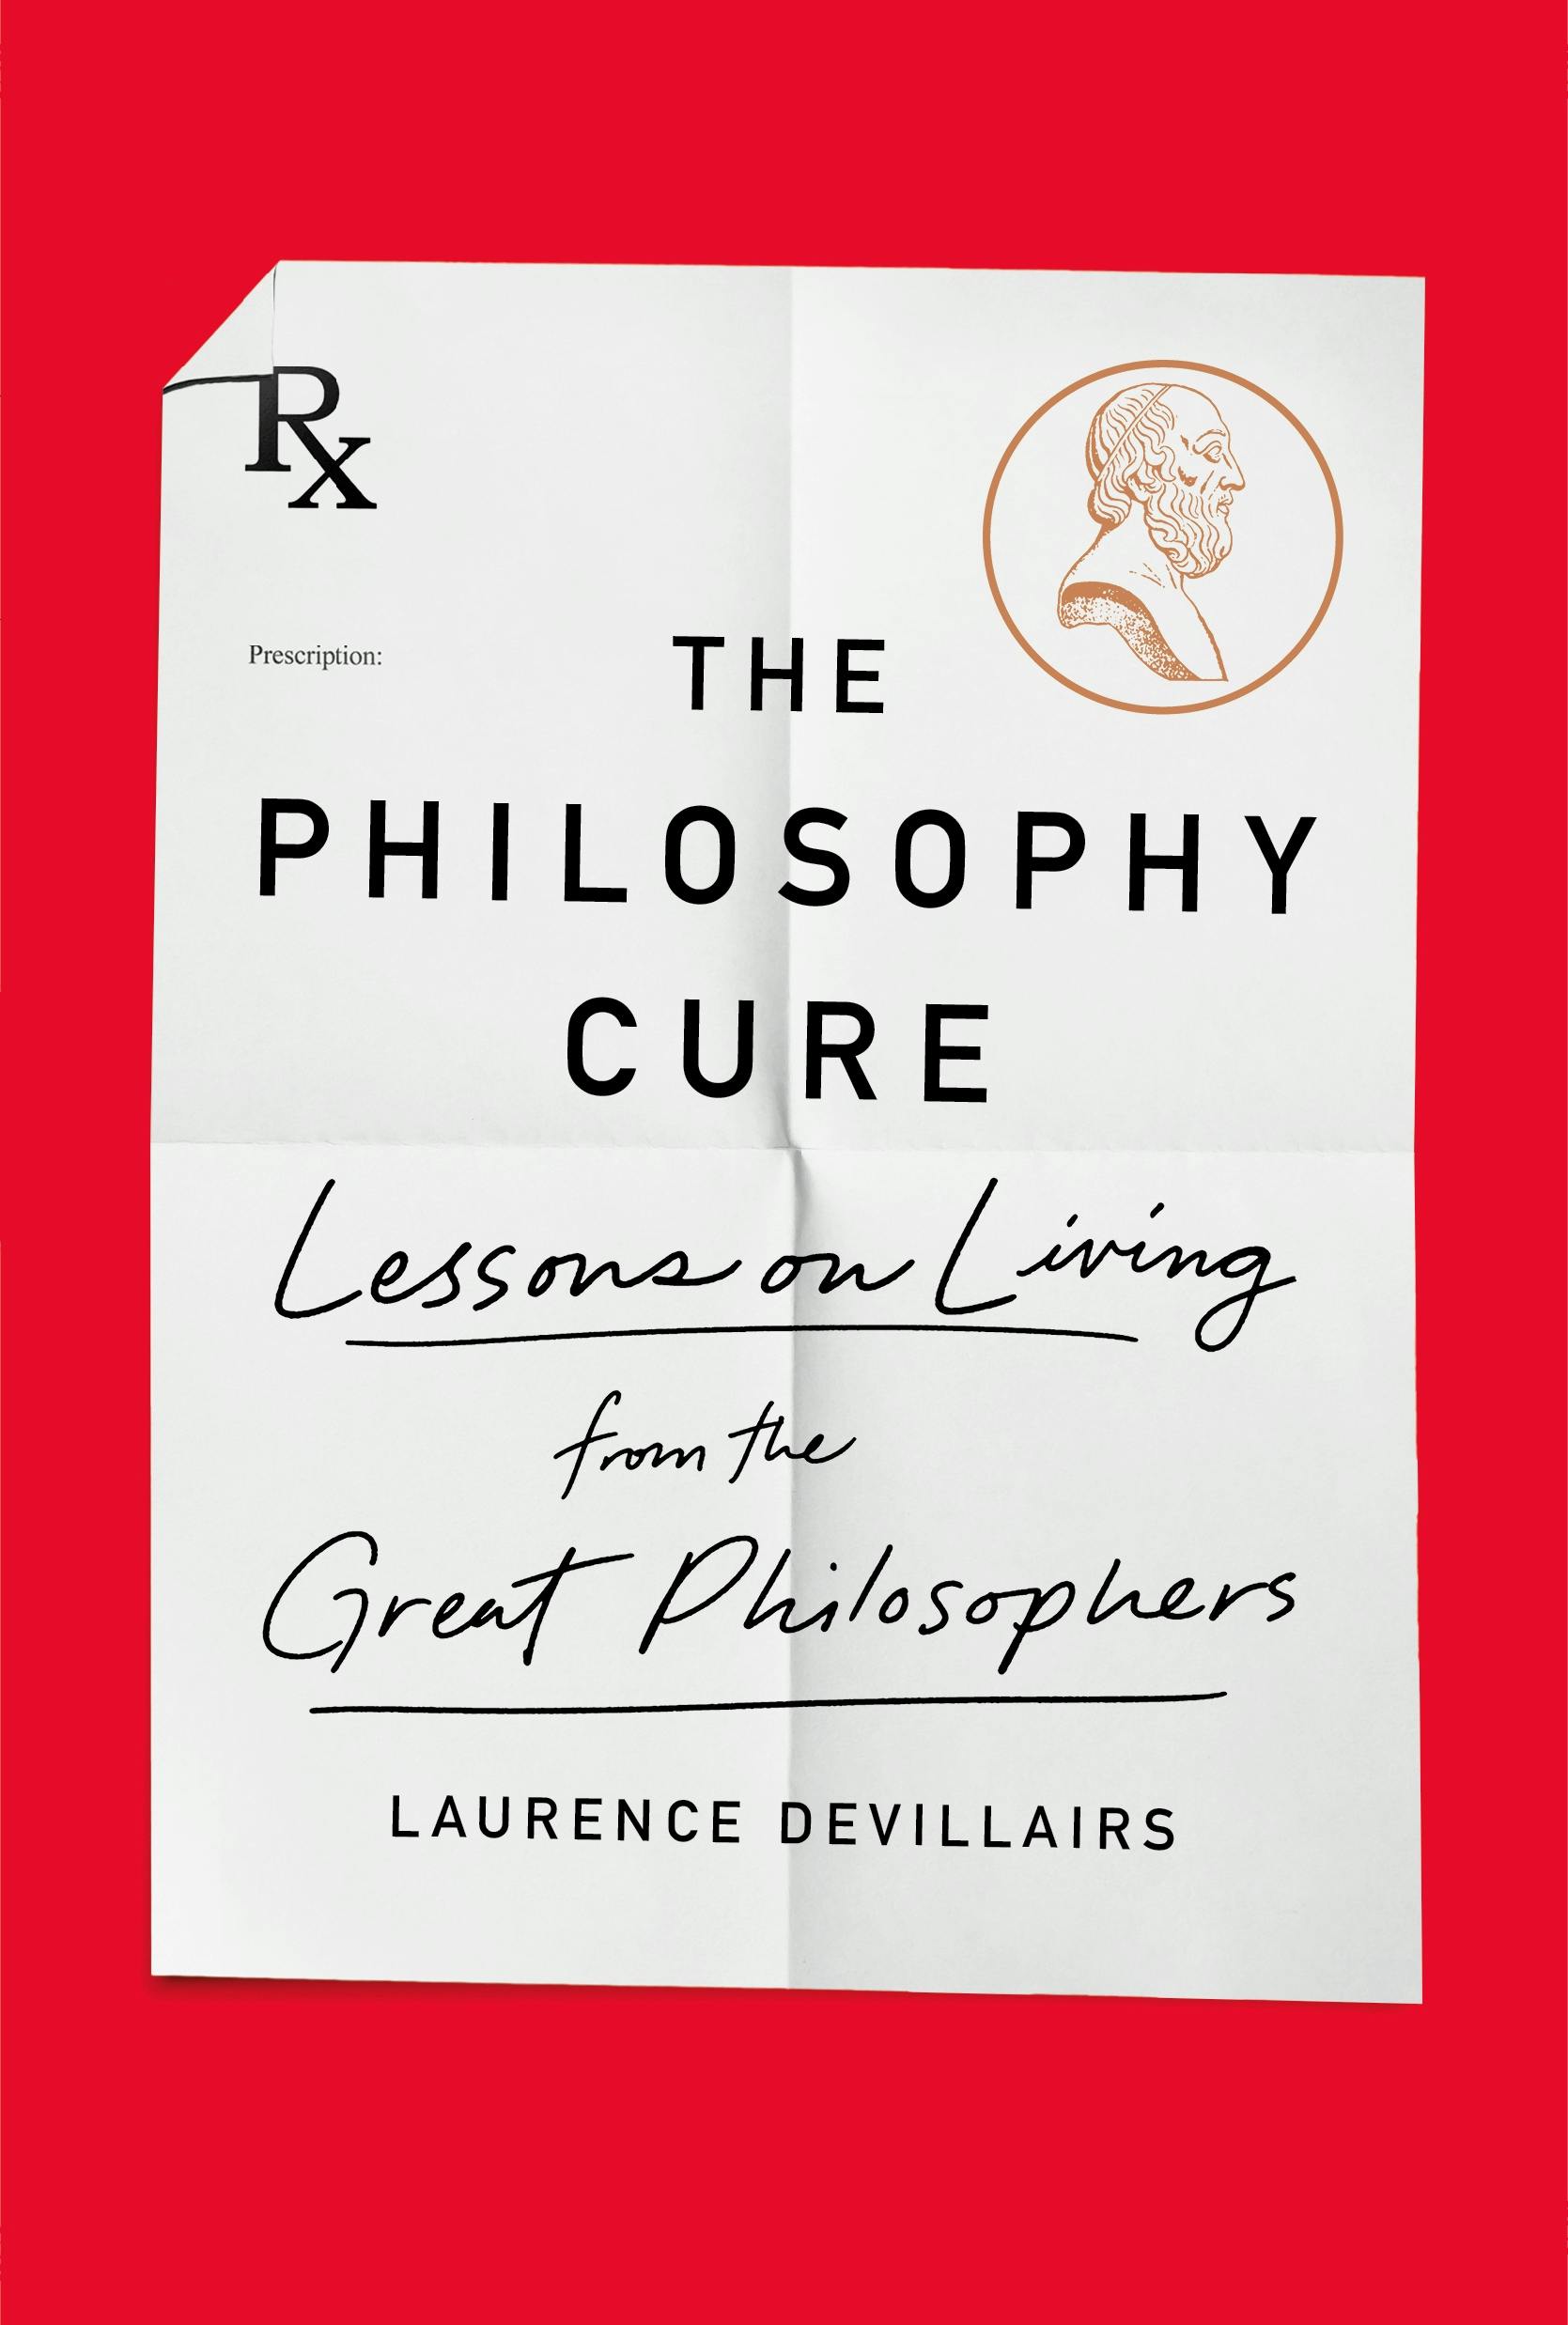 Describes for The Philosophy Cure by authors